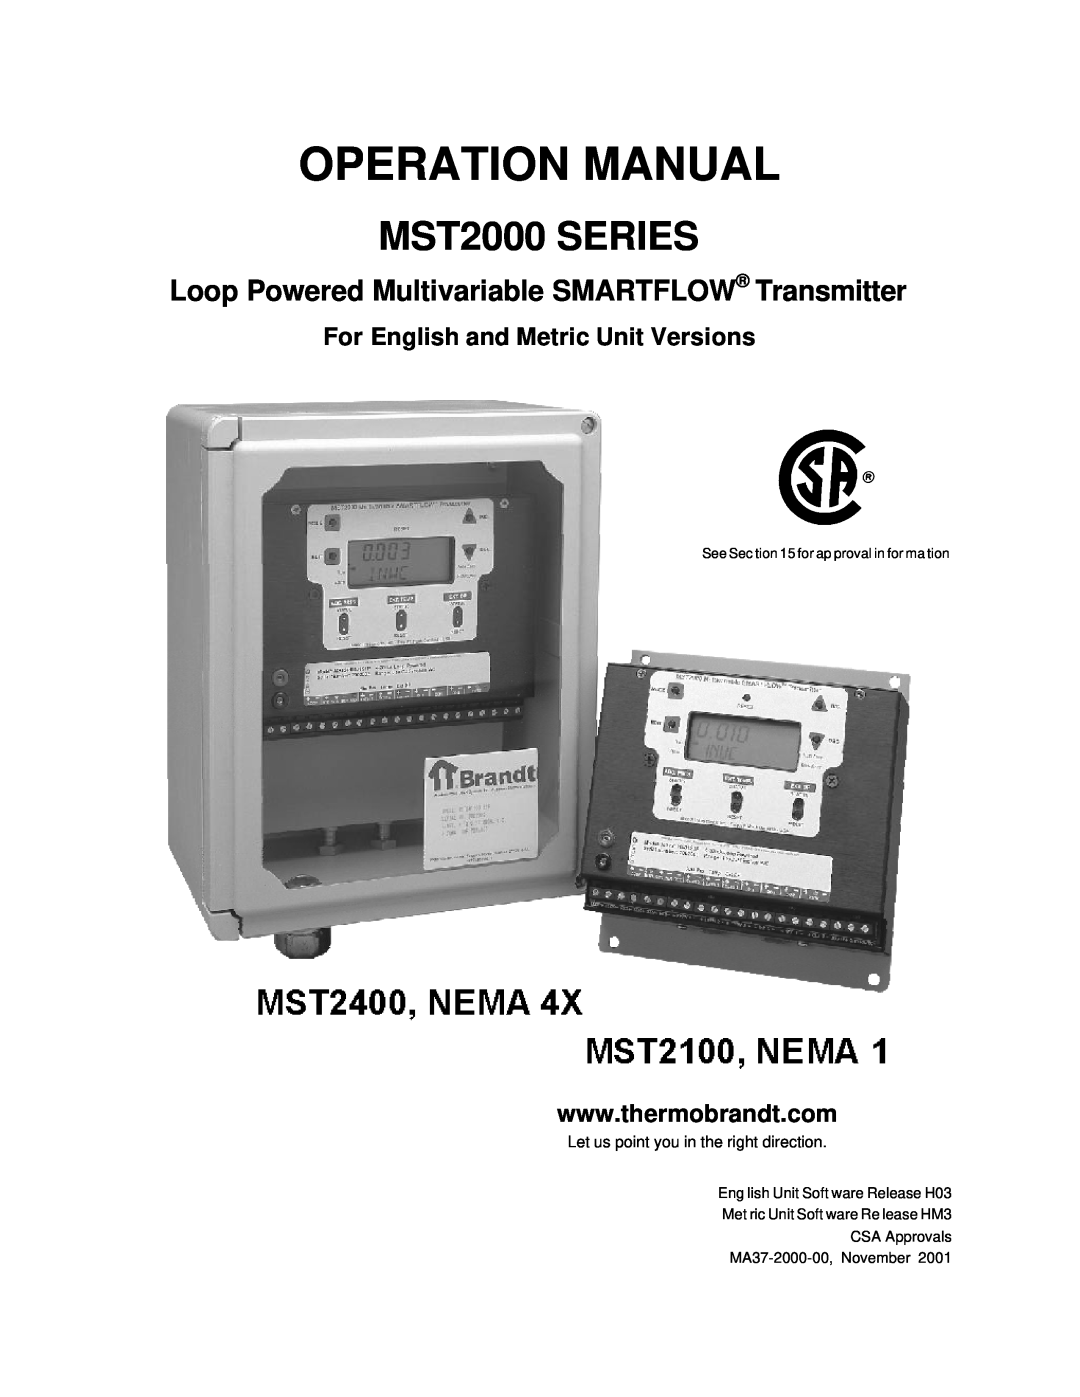 Tamron operation manual For English and Metric Unit Versions, MST2000 SERIES 